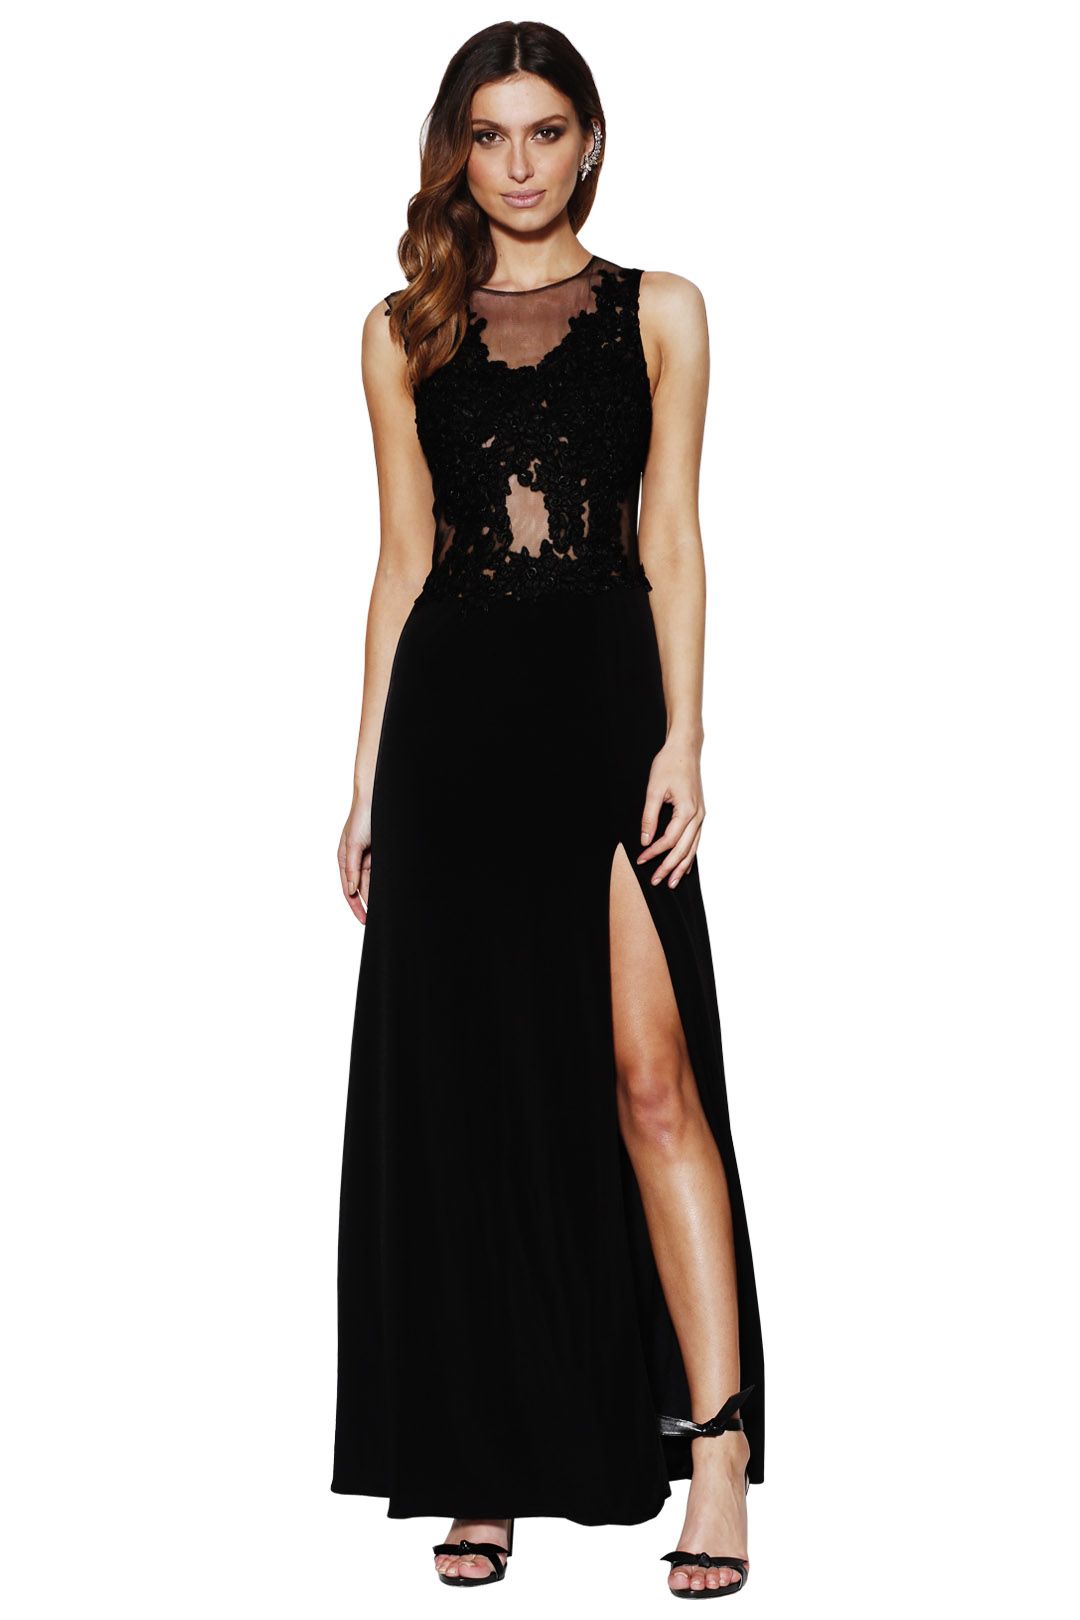 Grace and Hart - Starlet Gown Black - Front